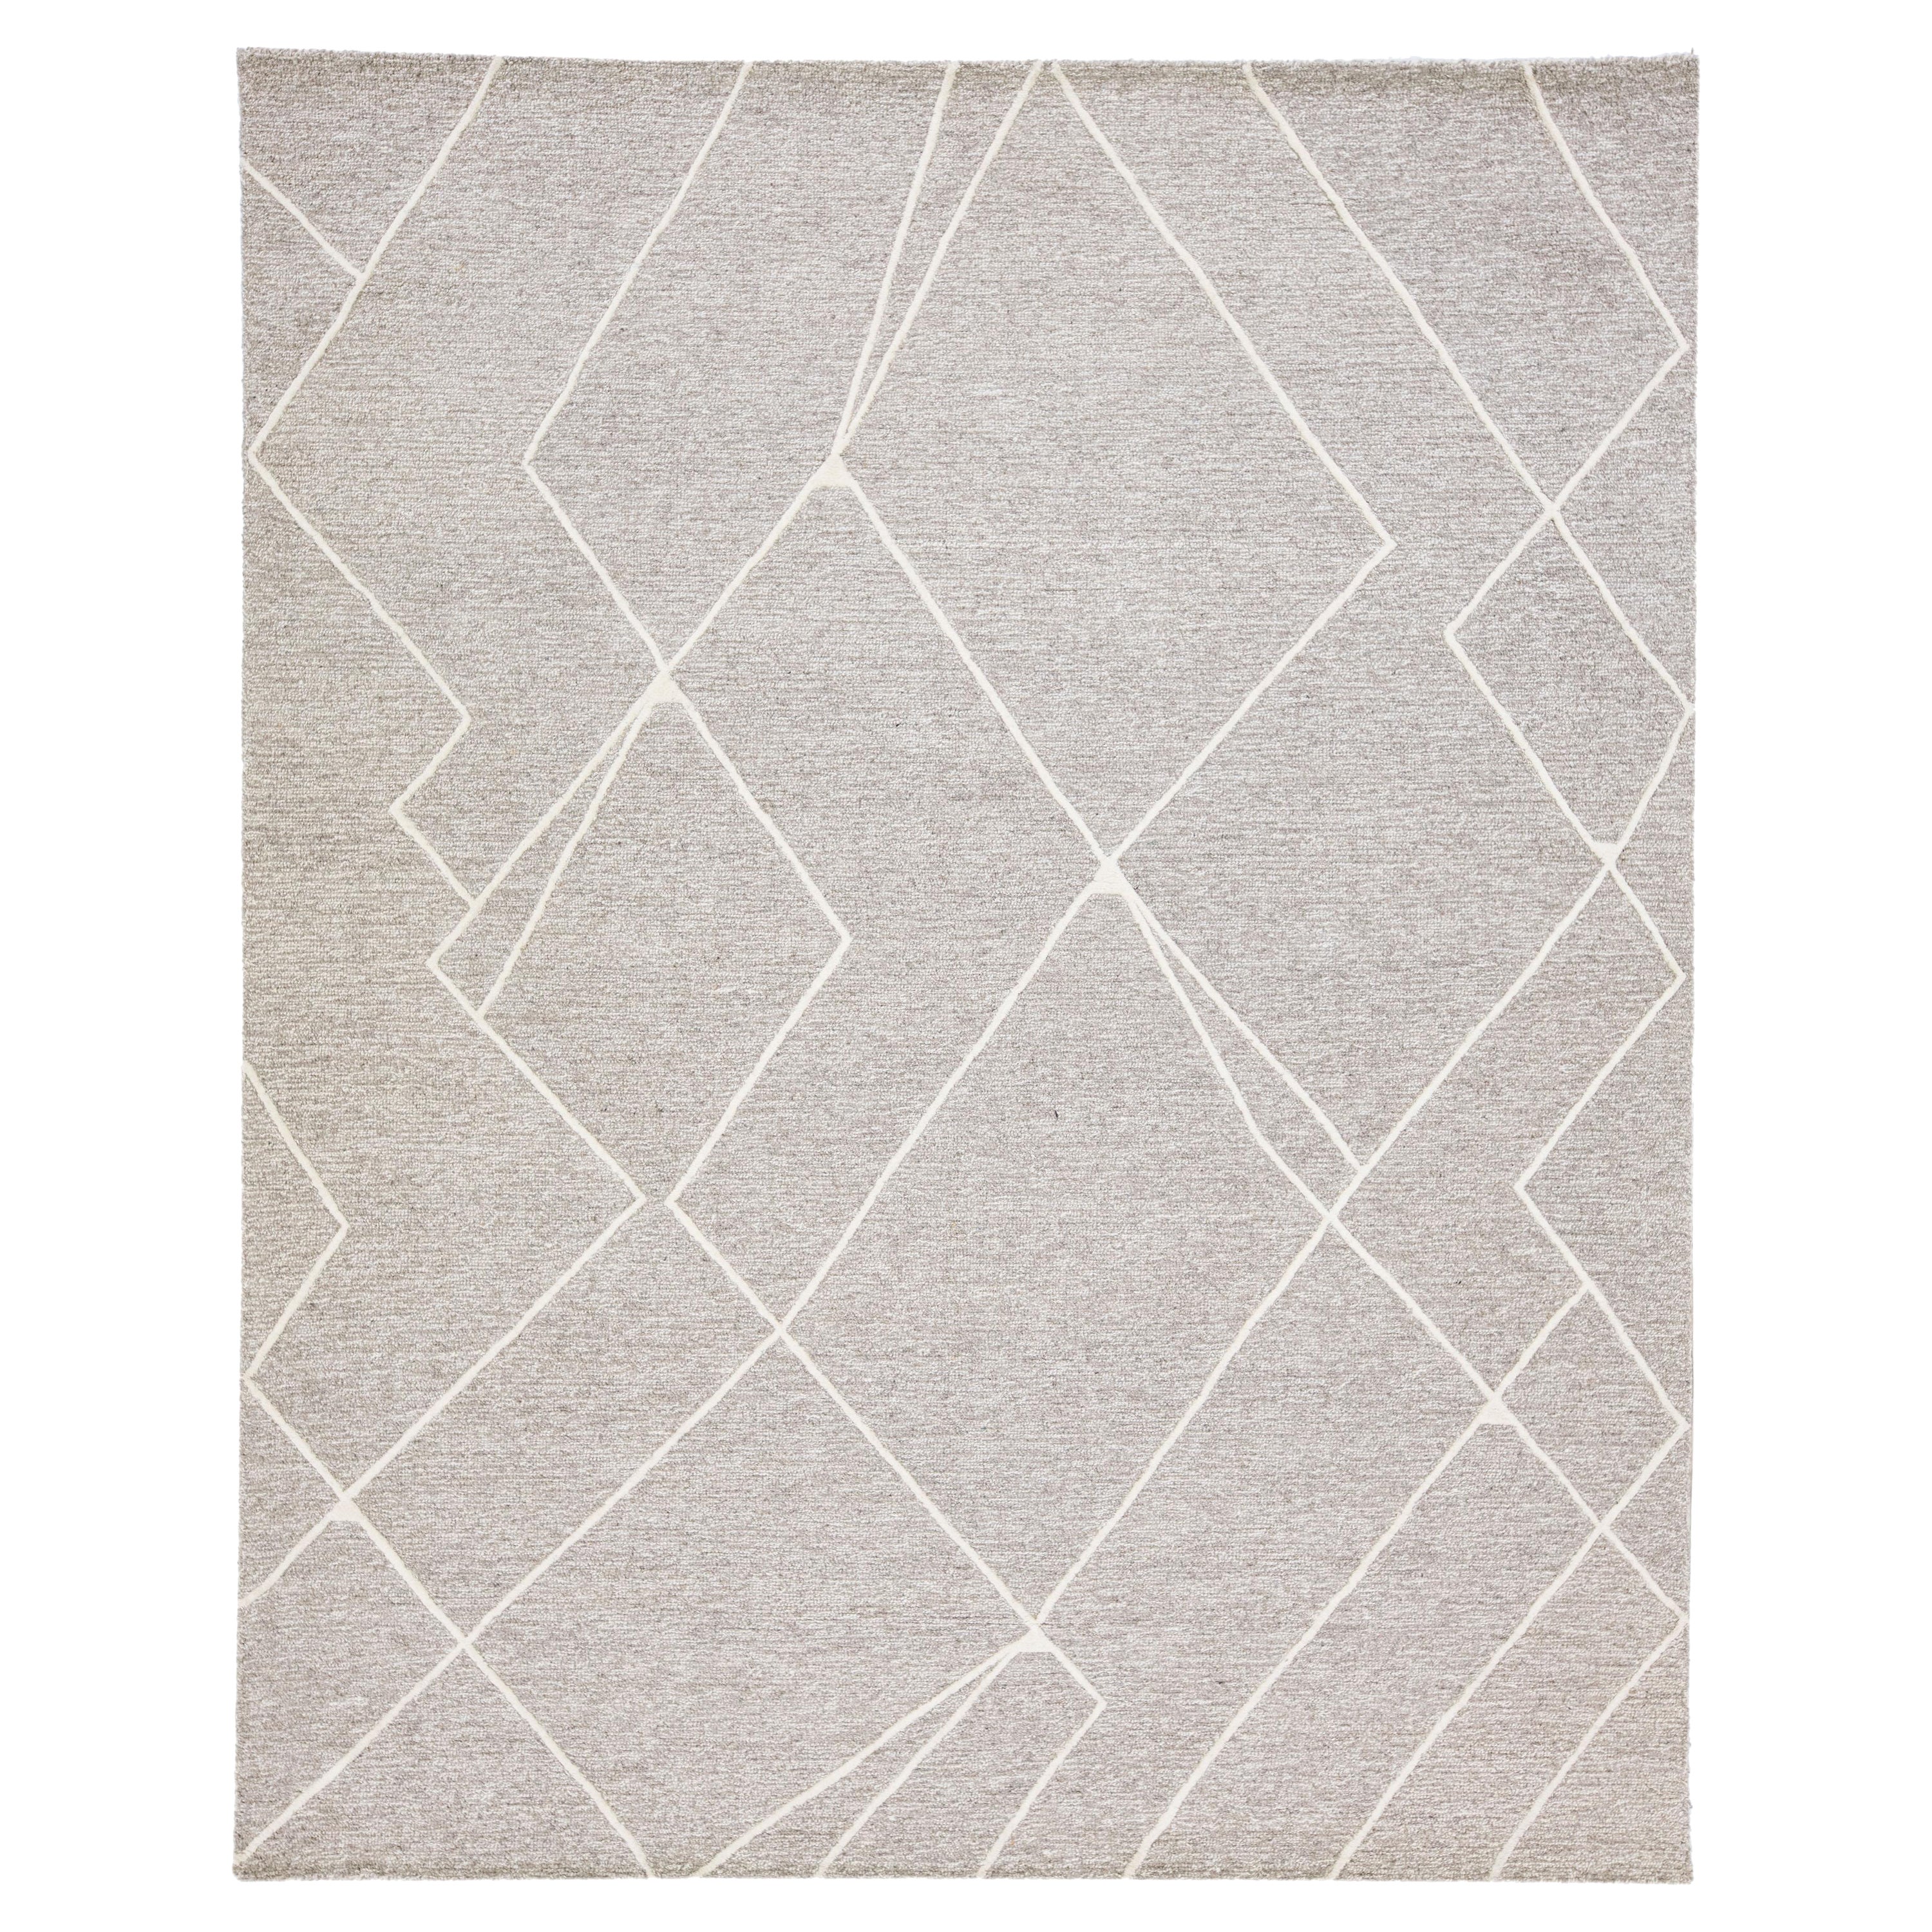 Contemporary Texture Gray & Ivory Hand-Tufted Geometric Wool Rug